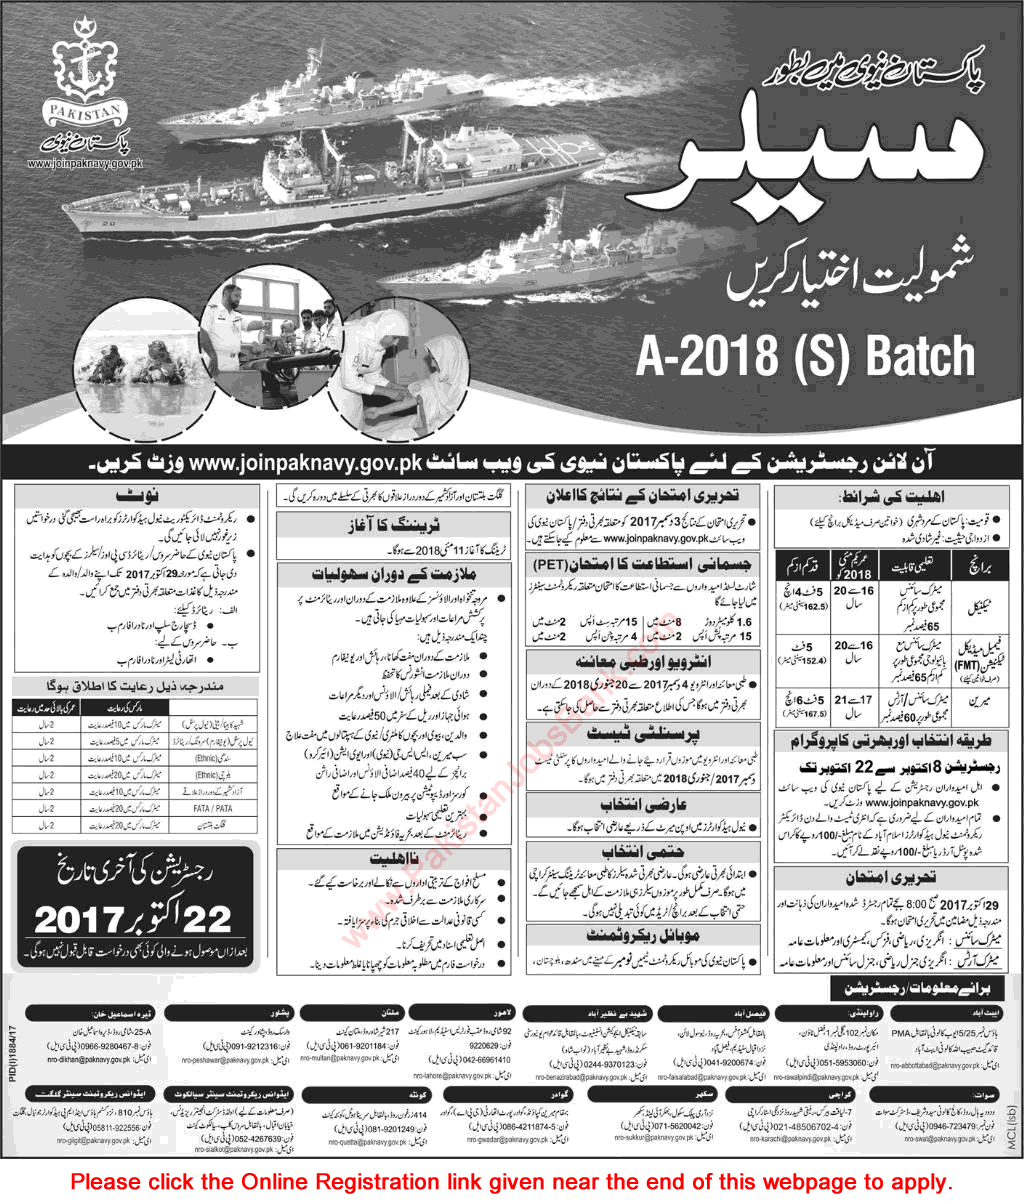 Join Pakistan Navy as Sailor October 2017 Online Registration Jobs in A-2018(S) Batch Latest Advertisement